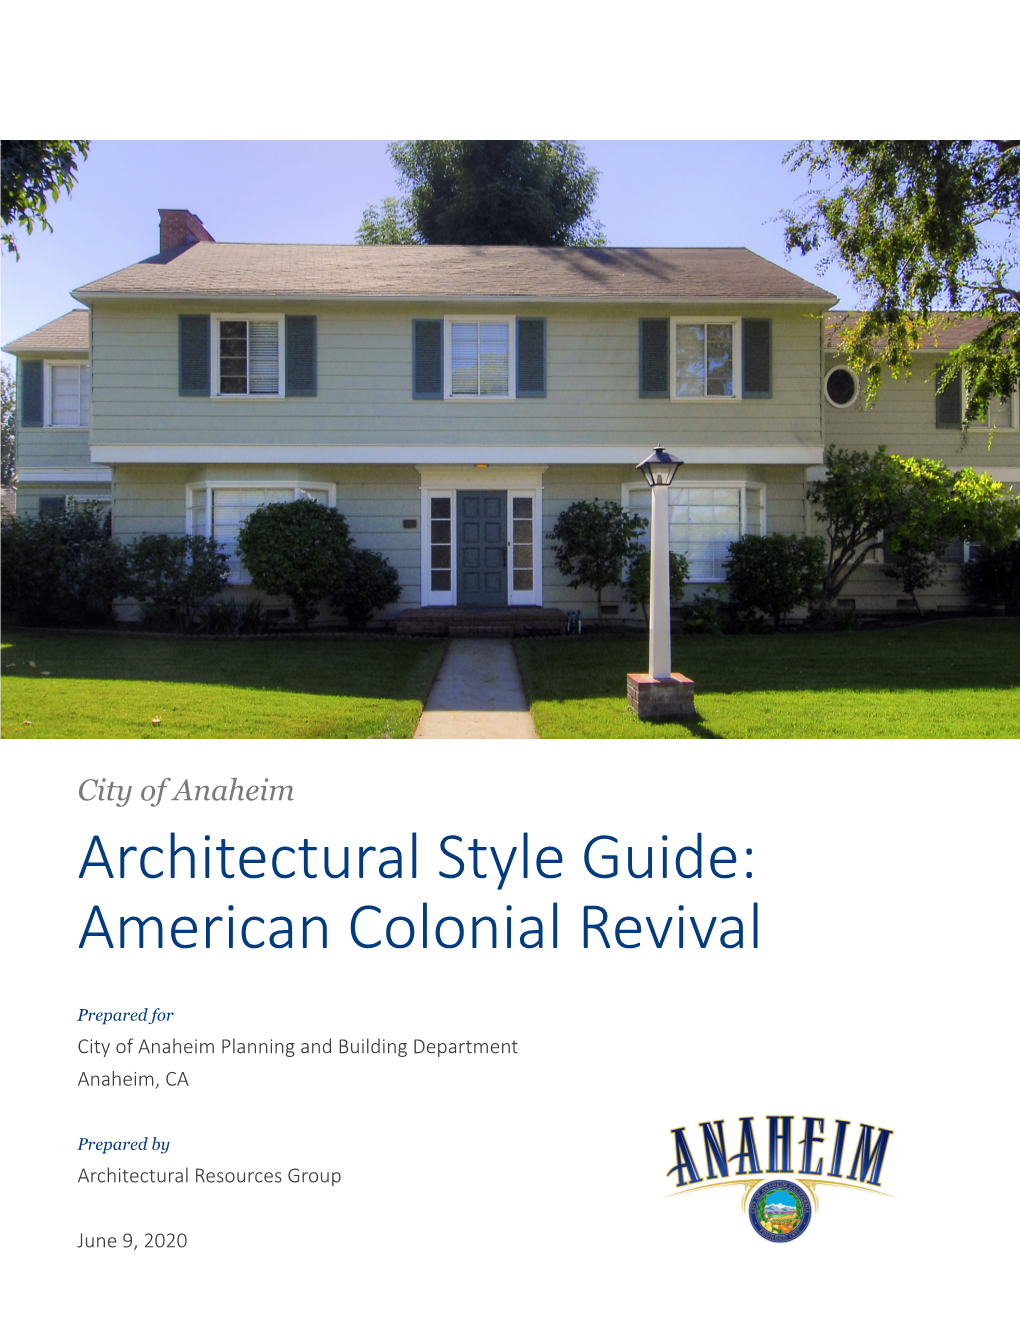 Architectural Style Guide: American Colonial Revival